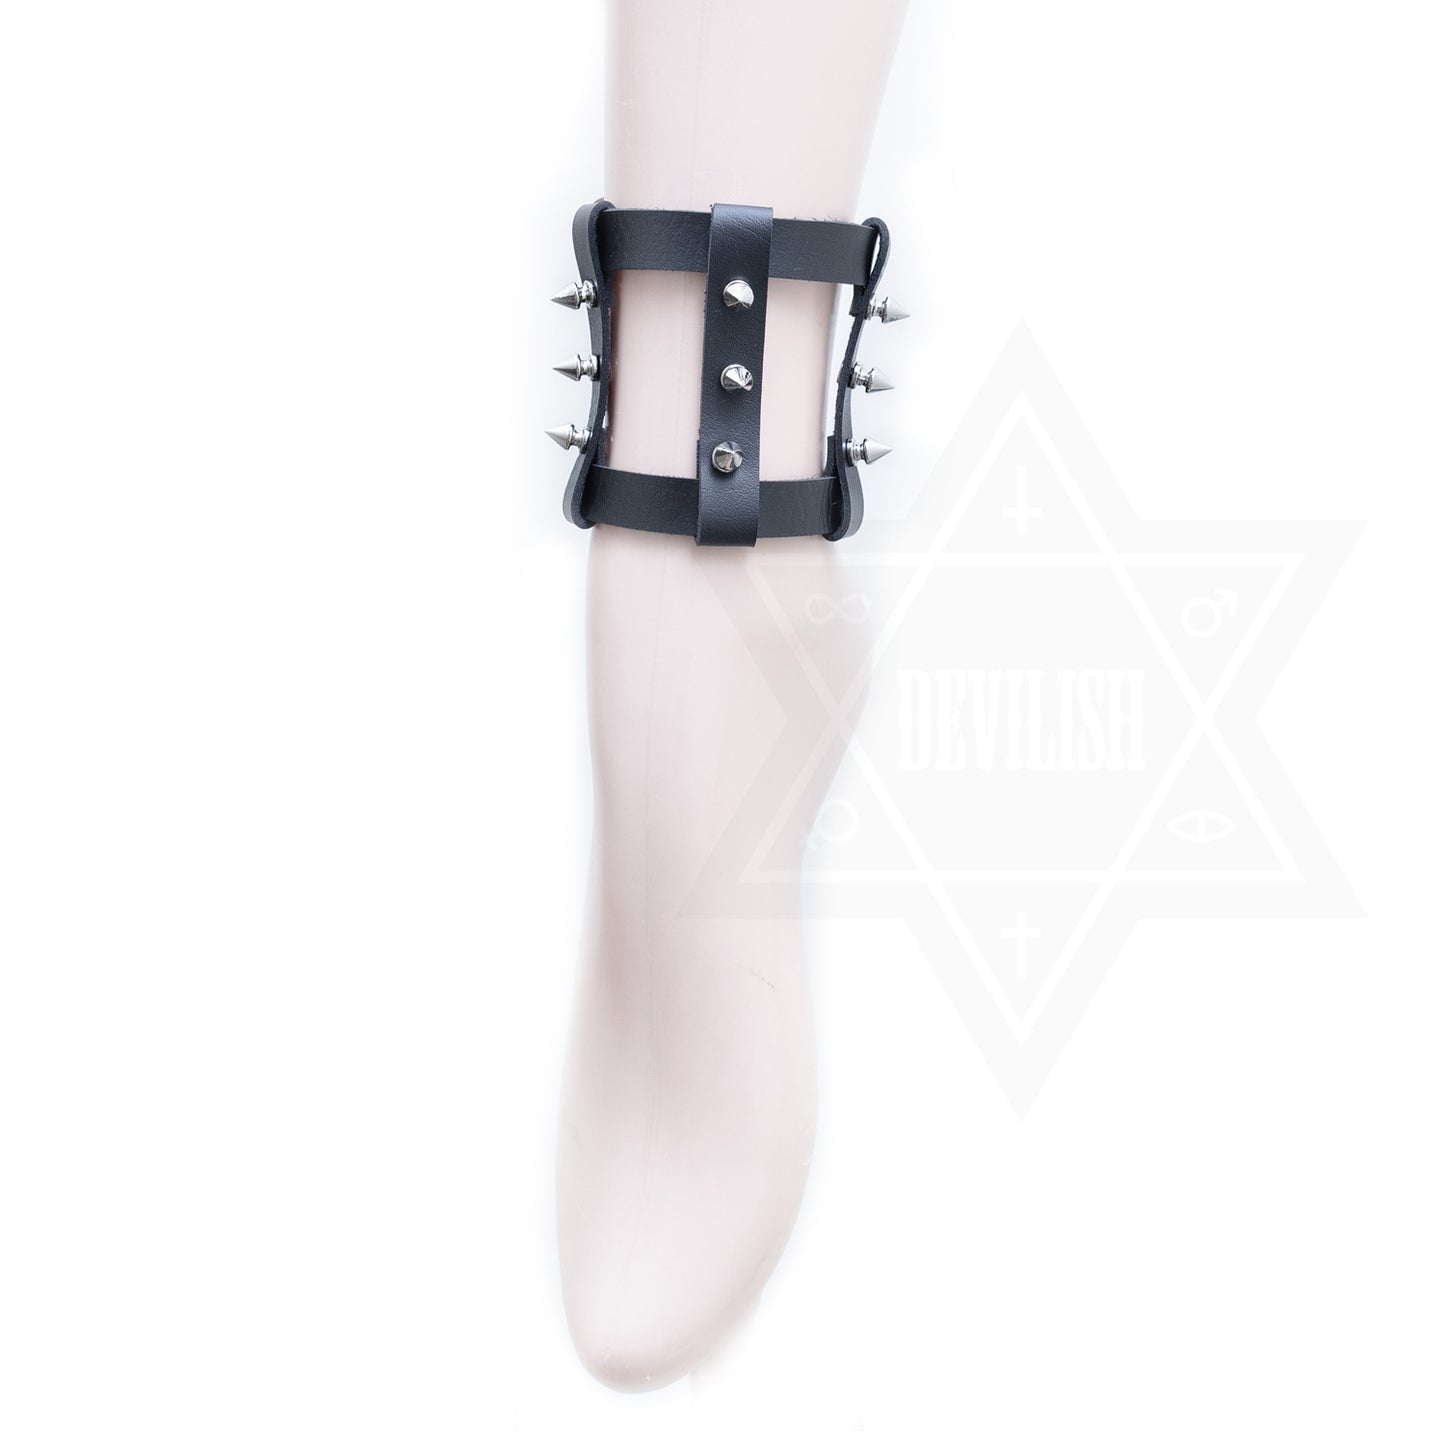 Spiky cage ankle cuff